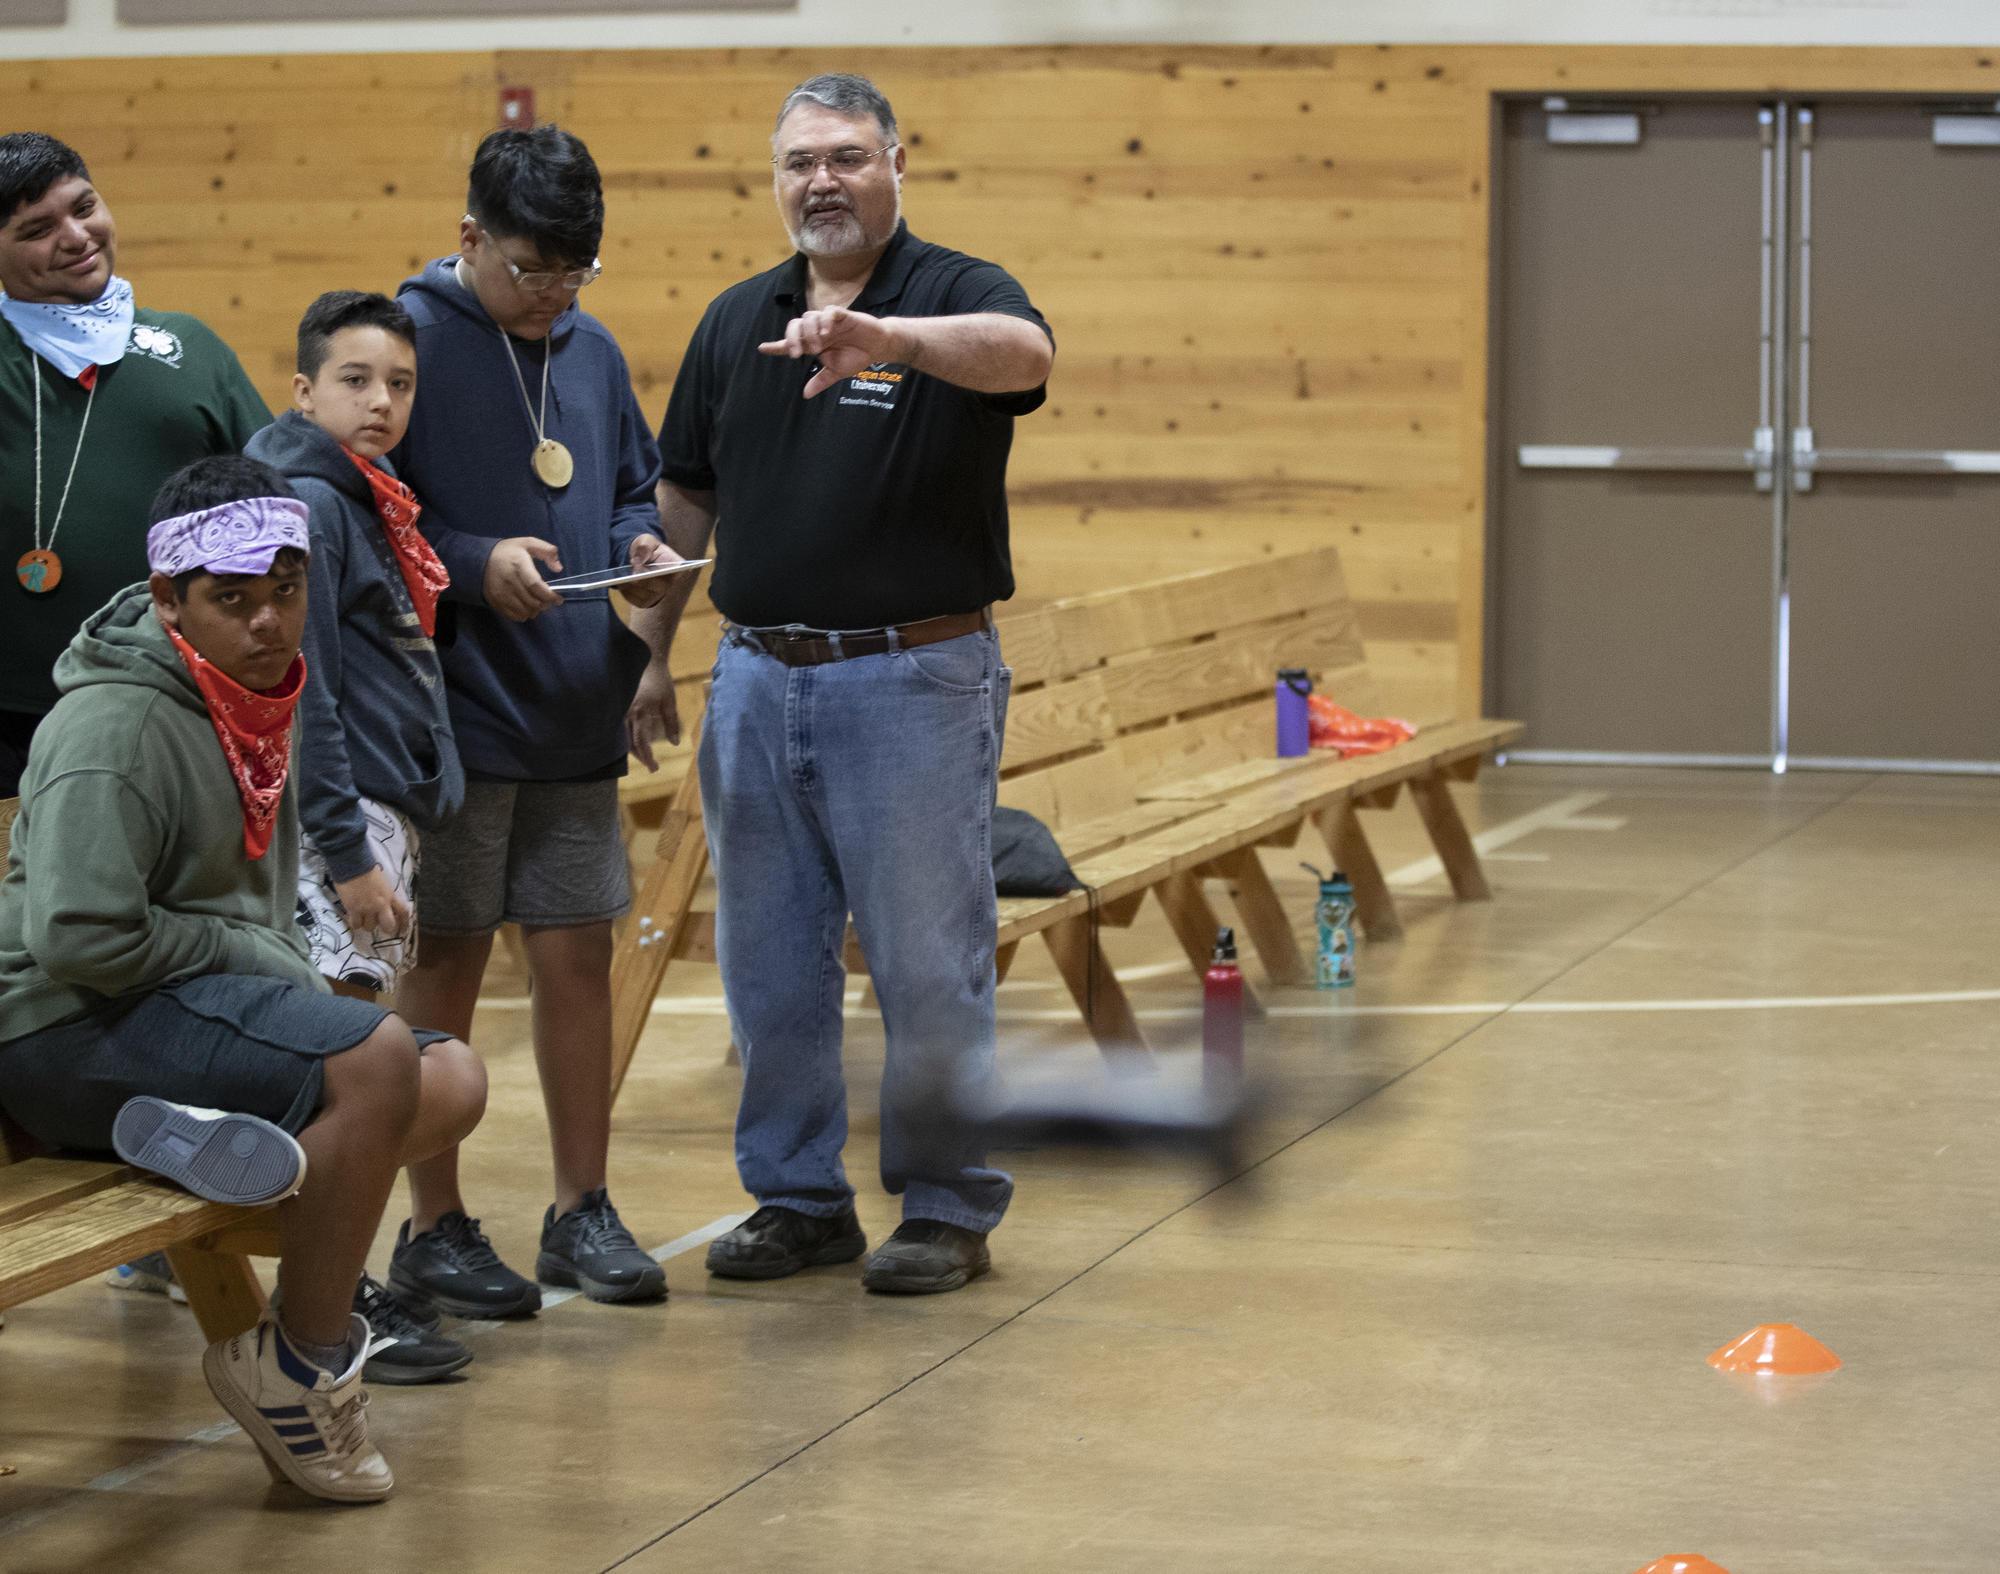 Four 4-H youth looking on as being taught about drones